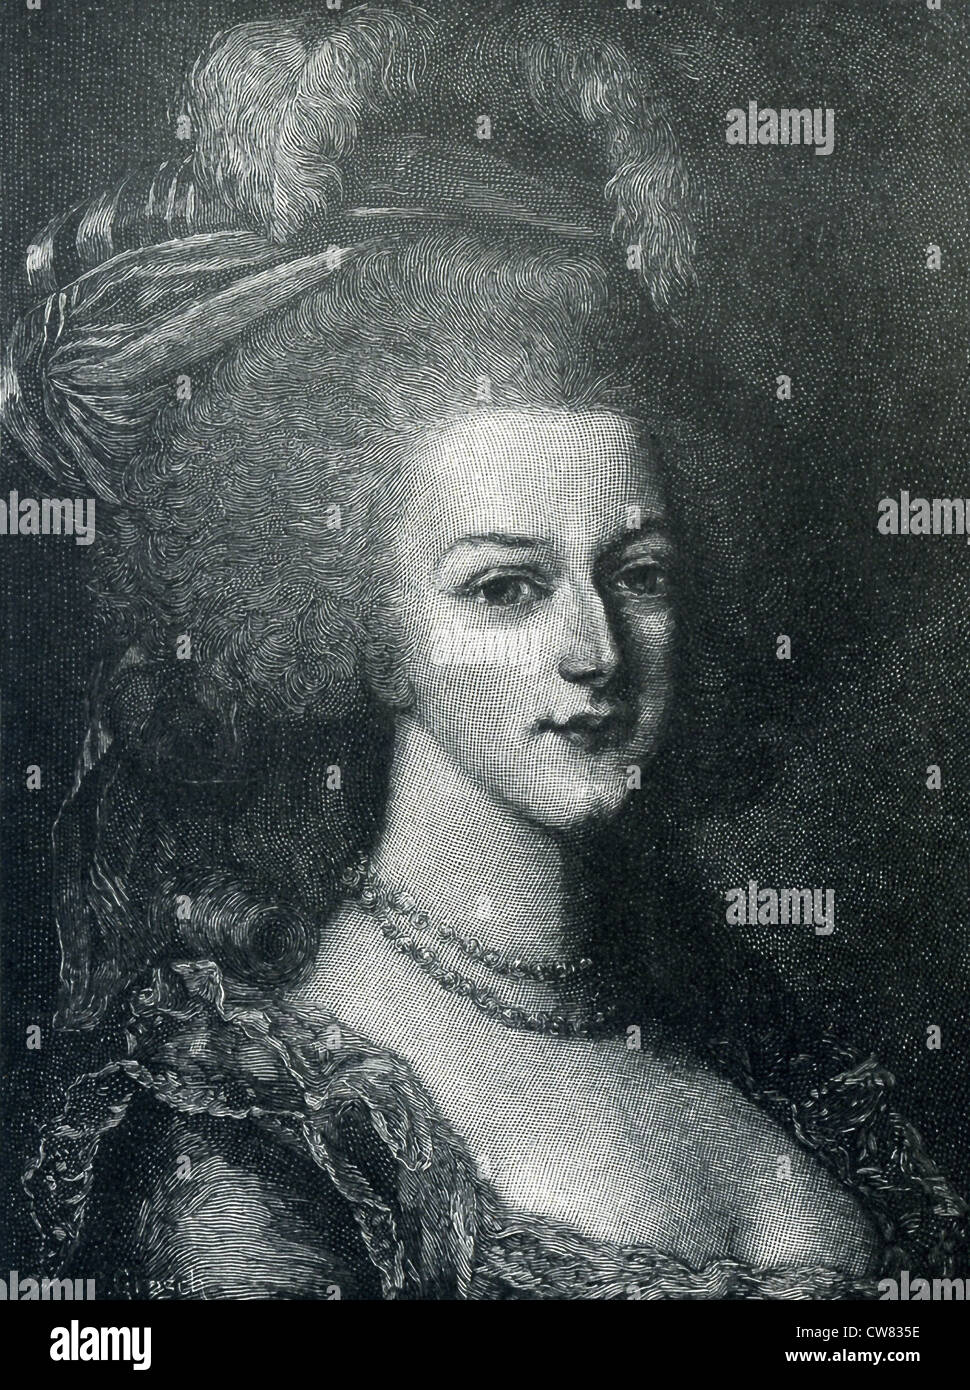 Marie Antoinette, wife of King Louis XVI of France, was the 15th Stock Photo: 49965258 - Alamy